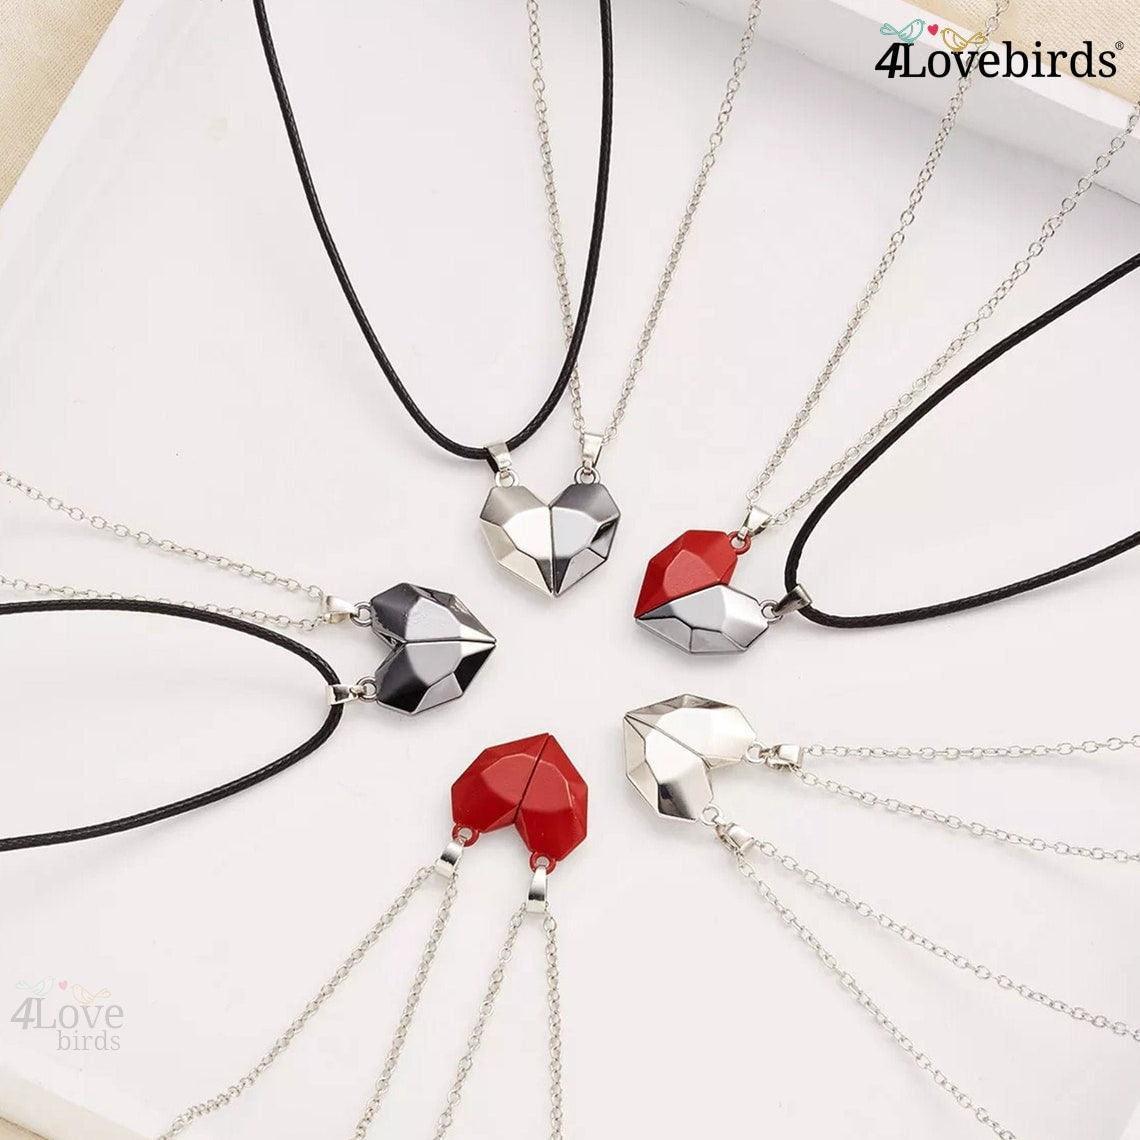 2pcs Magnetic Heart Shaped Couple Necklace For Women, Valentine's Day  Sweater Chain, Best Friends, Party Gift Jewelry